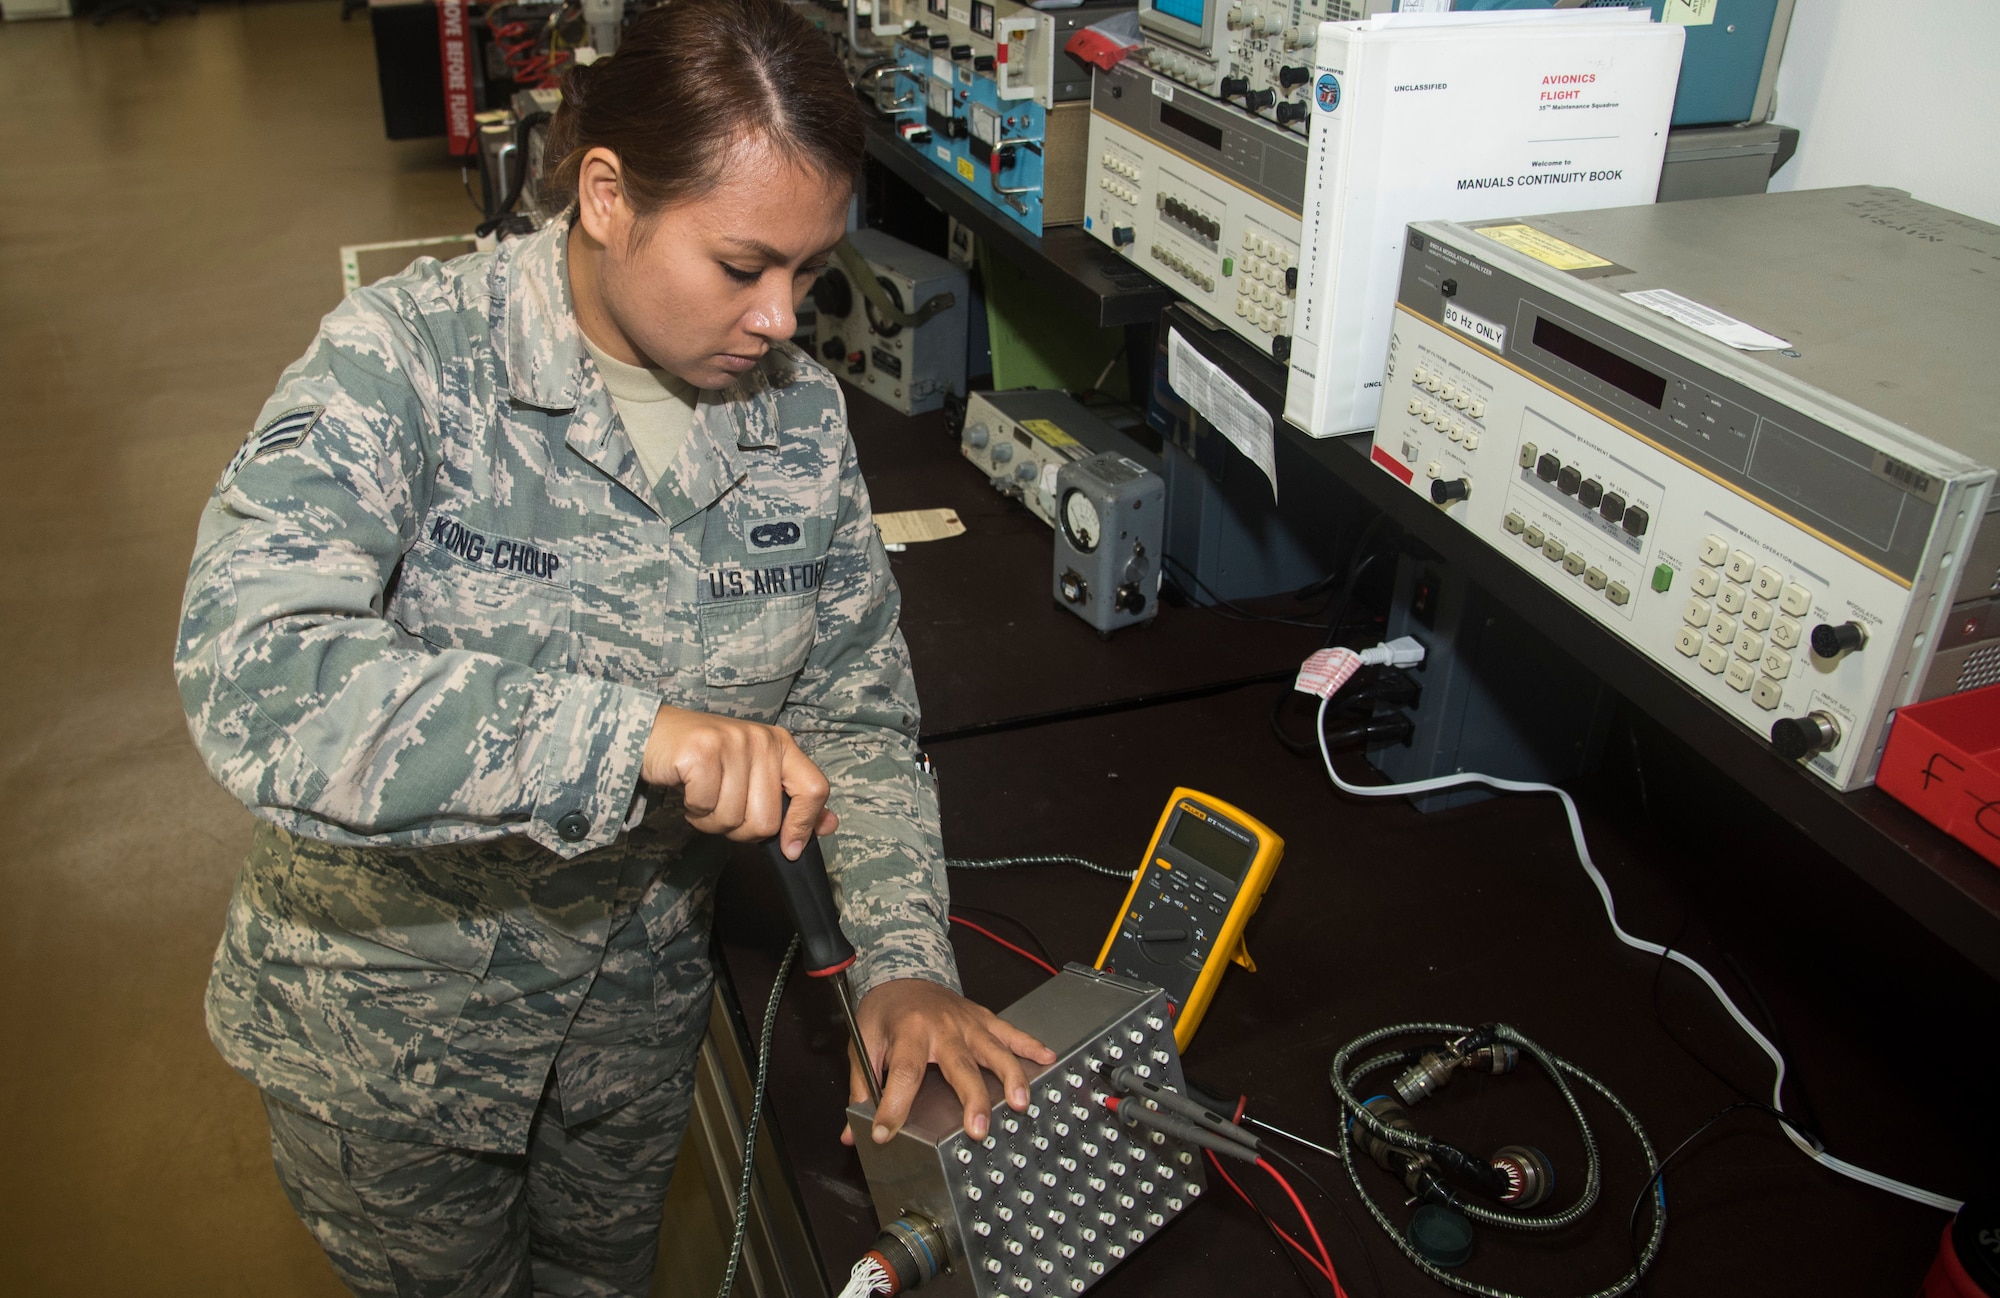 U.S. Air Force Senior Airman Nary Kong-Choup, a team member with the 35th Maintenance Squadron avionics intermediate section electronic warfare section, assembles a breakout box at Misawa Air Base, Japan, Aug. 1, 2016. Kong-Choup was one of seven Airmen who took the initiative on building this device, saving time and requiring less manpower to operate. The apparatus connects to parts on F-16 Fighting Falcons, called line replacement units, and inspects the integrity of electrical pathways. (U.S. Air Force photo by Senior Airman Jordyn Fetter)